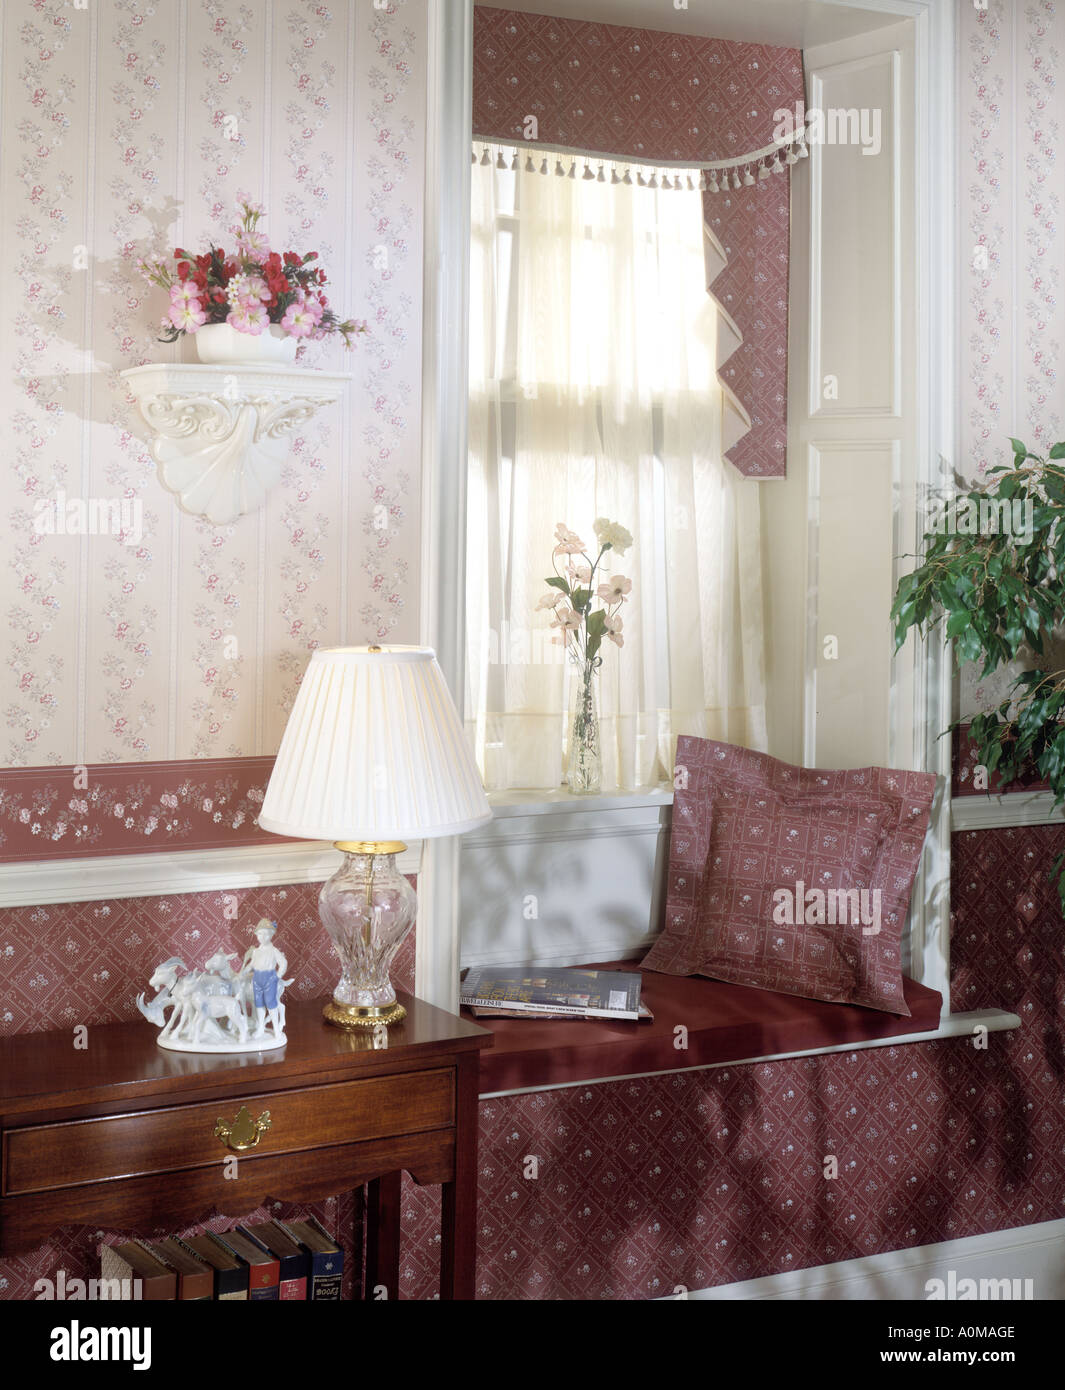 room interior wallpaper window seating alcove window seat alcove lace  curtain pillow lamp table nick nack bric a brac Stock Photo - Alamy